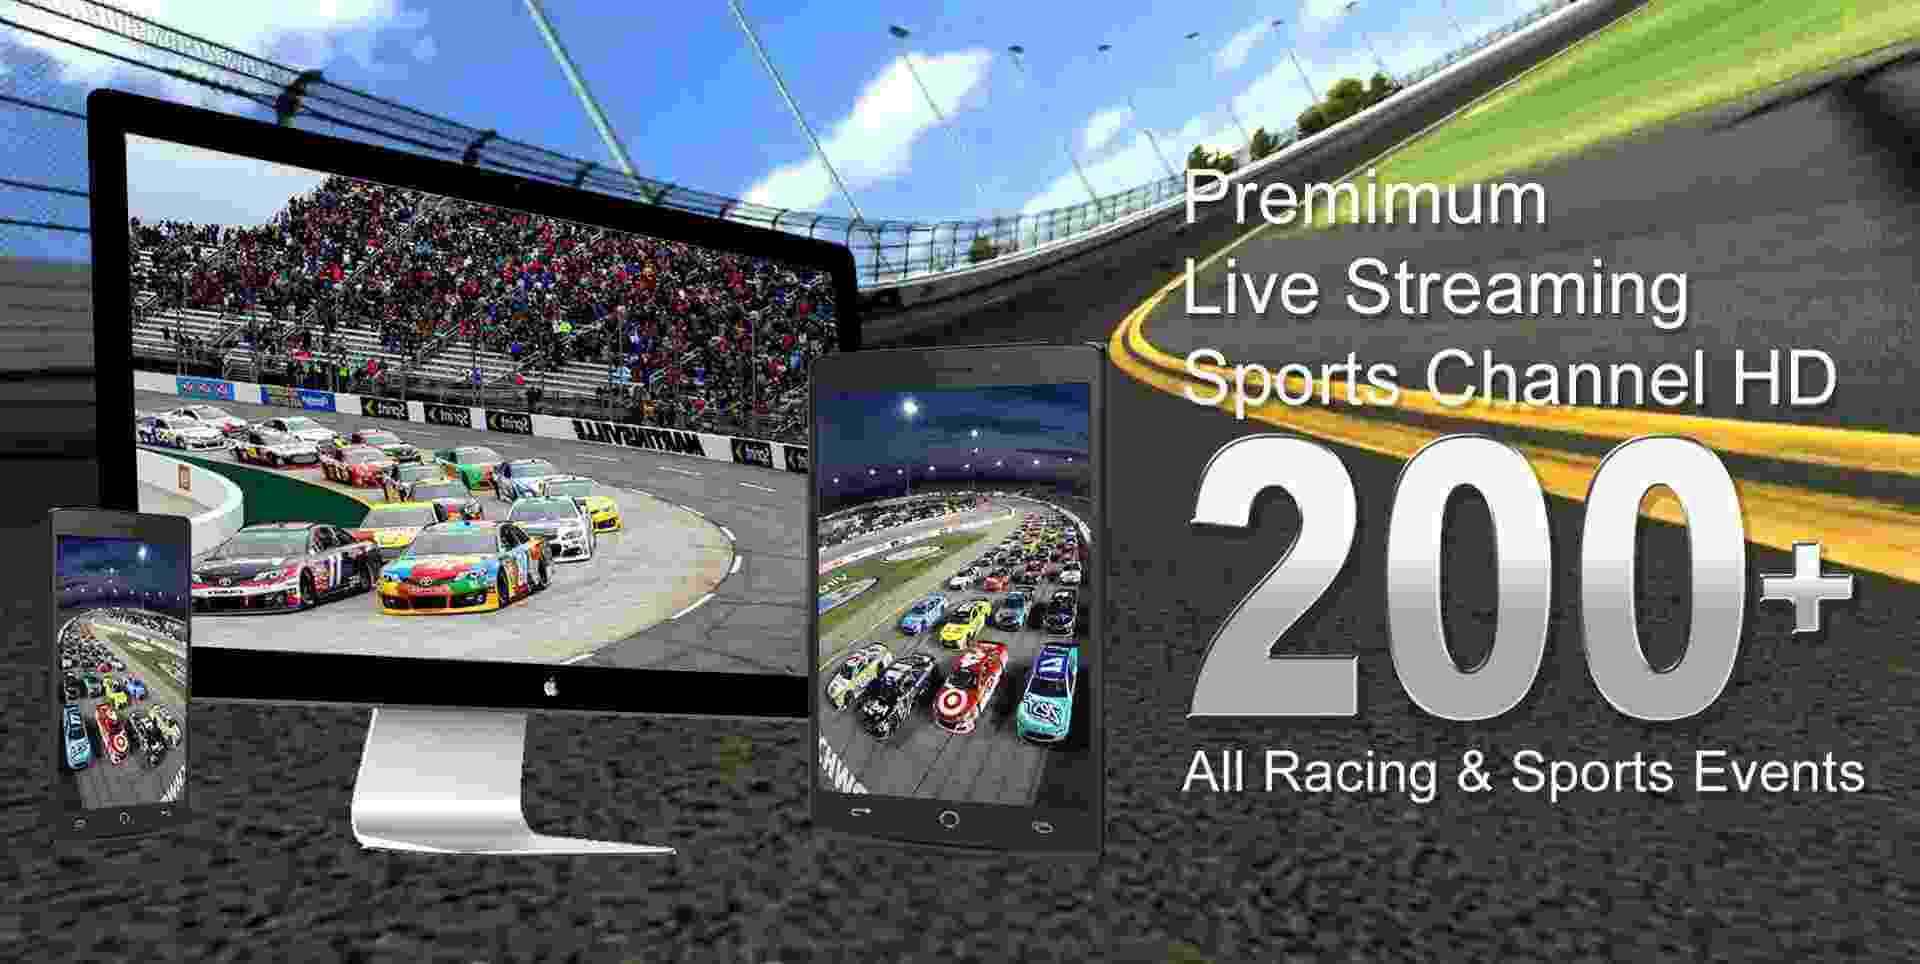 watch-hollywood-casino-400-live